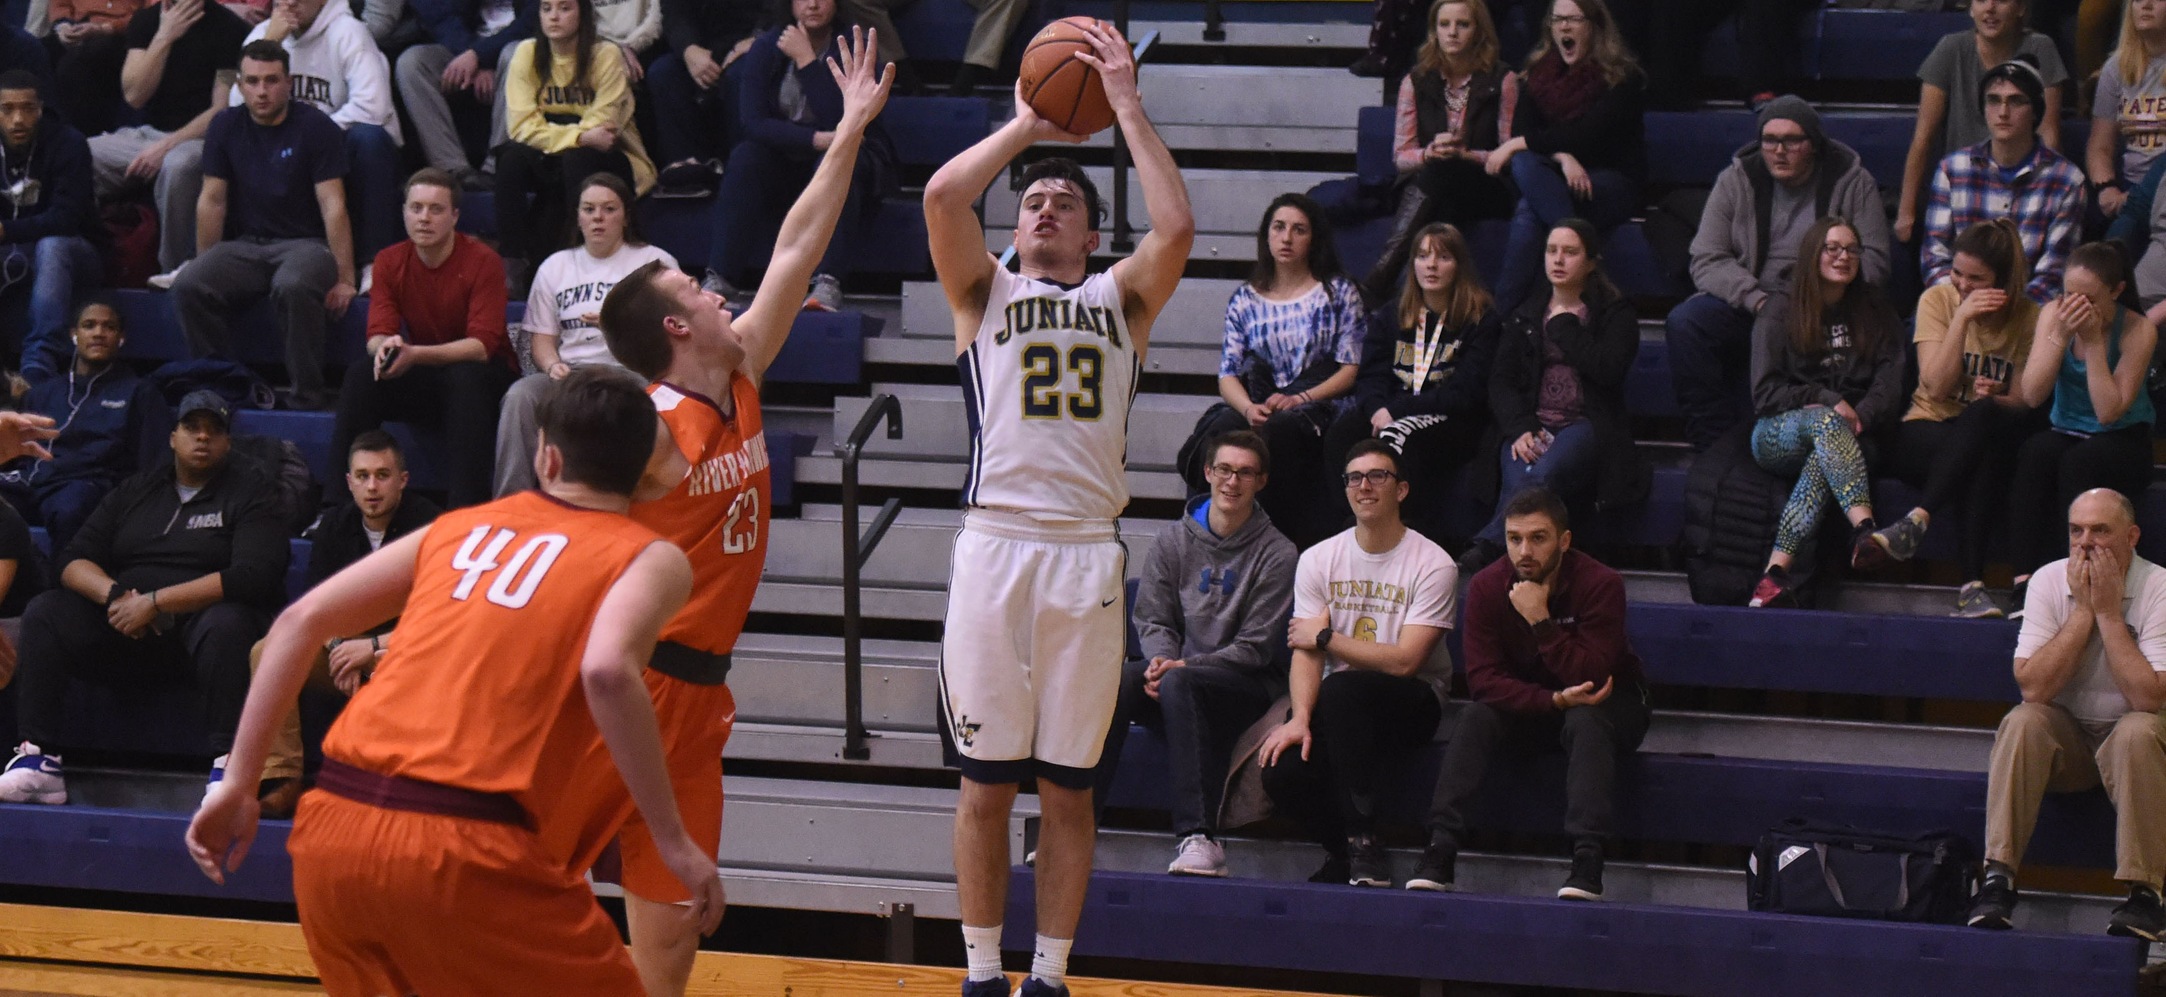 Brandon Martinazzi had his second double-double of the year as he tallied 17 points and 10 rebounds.